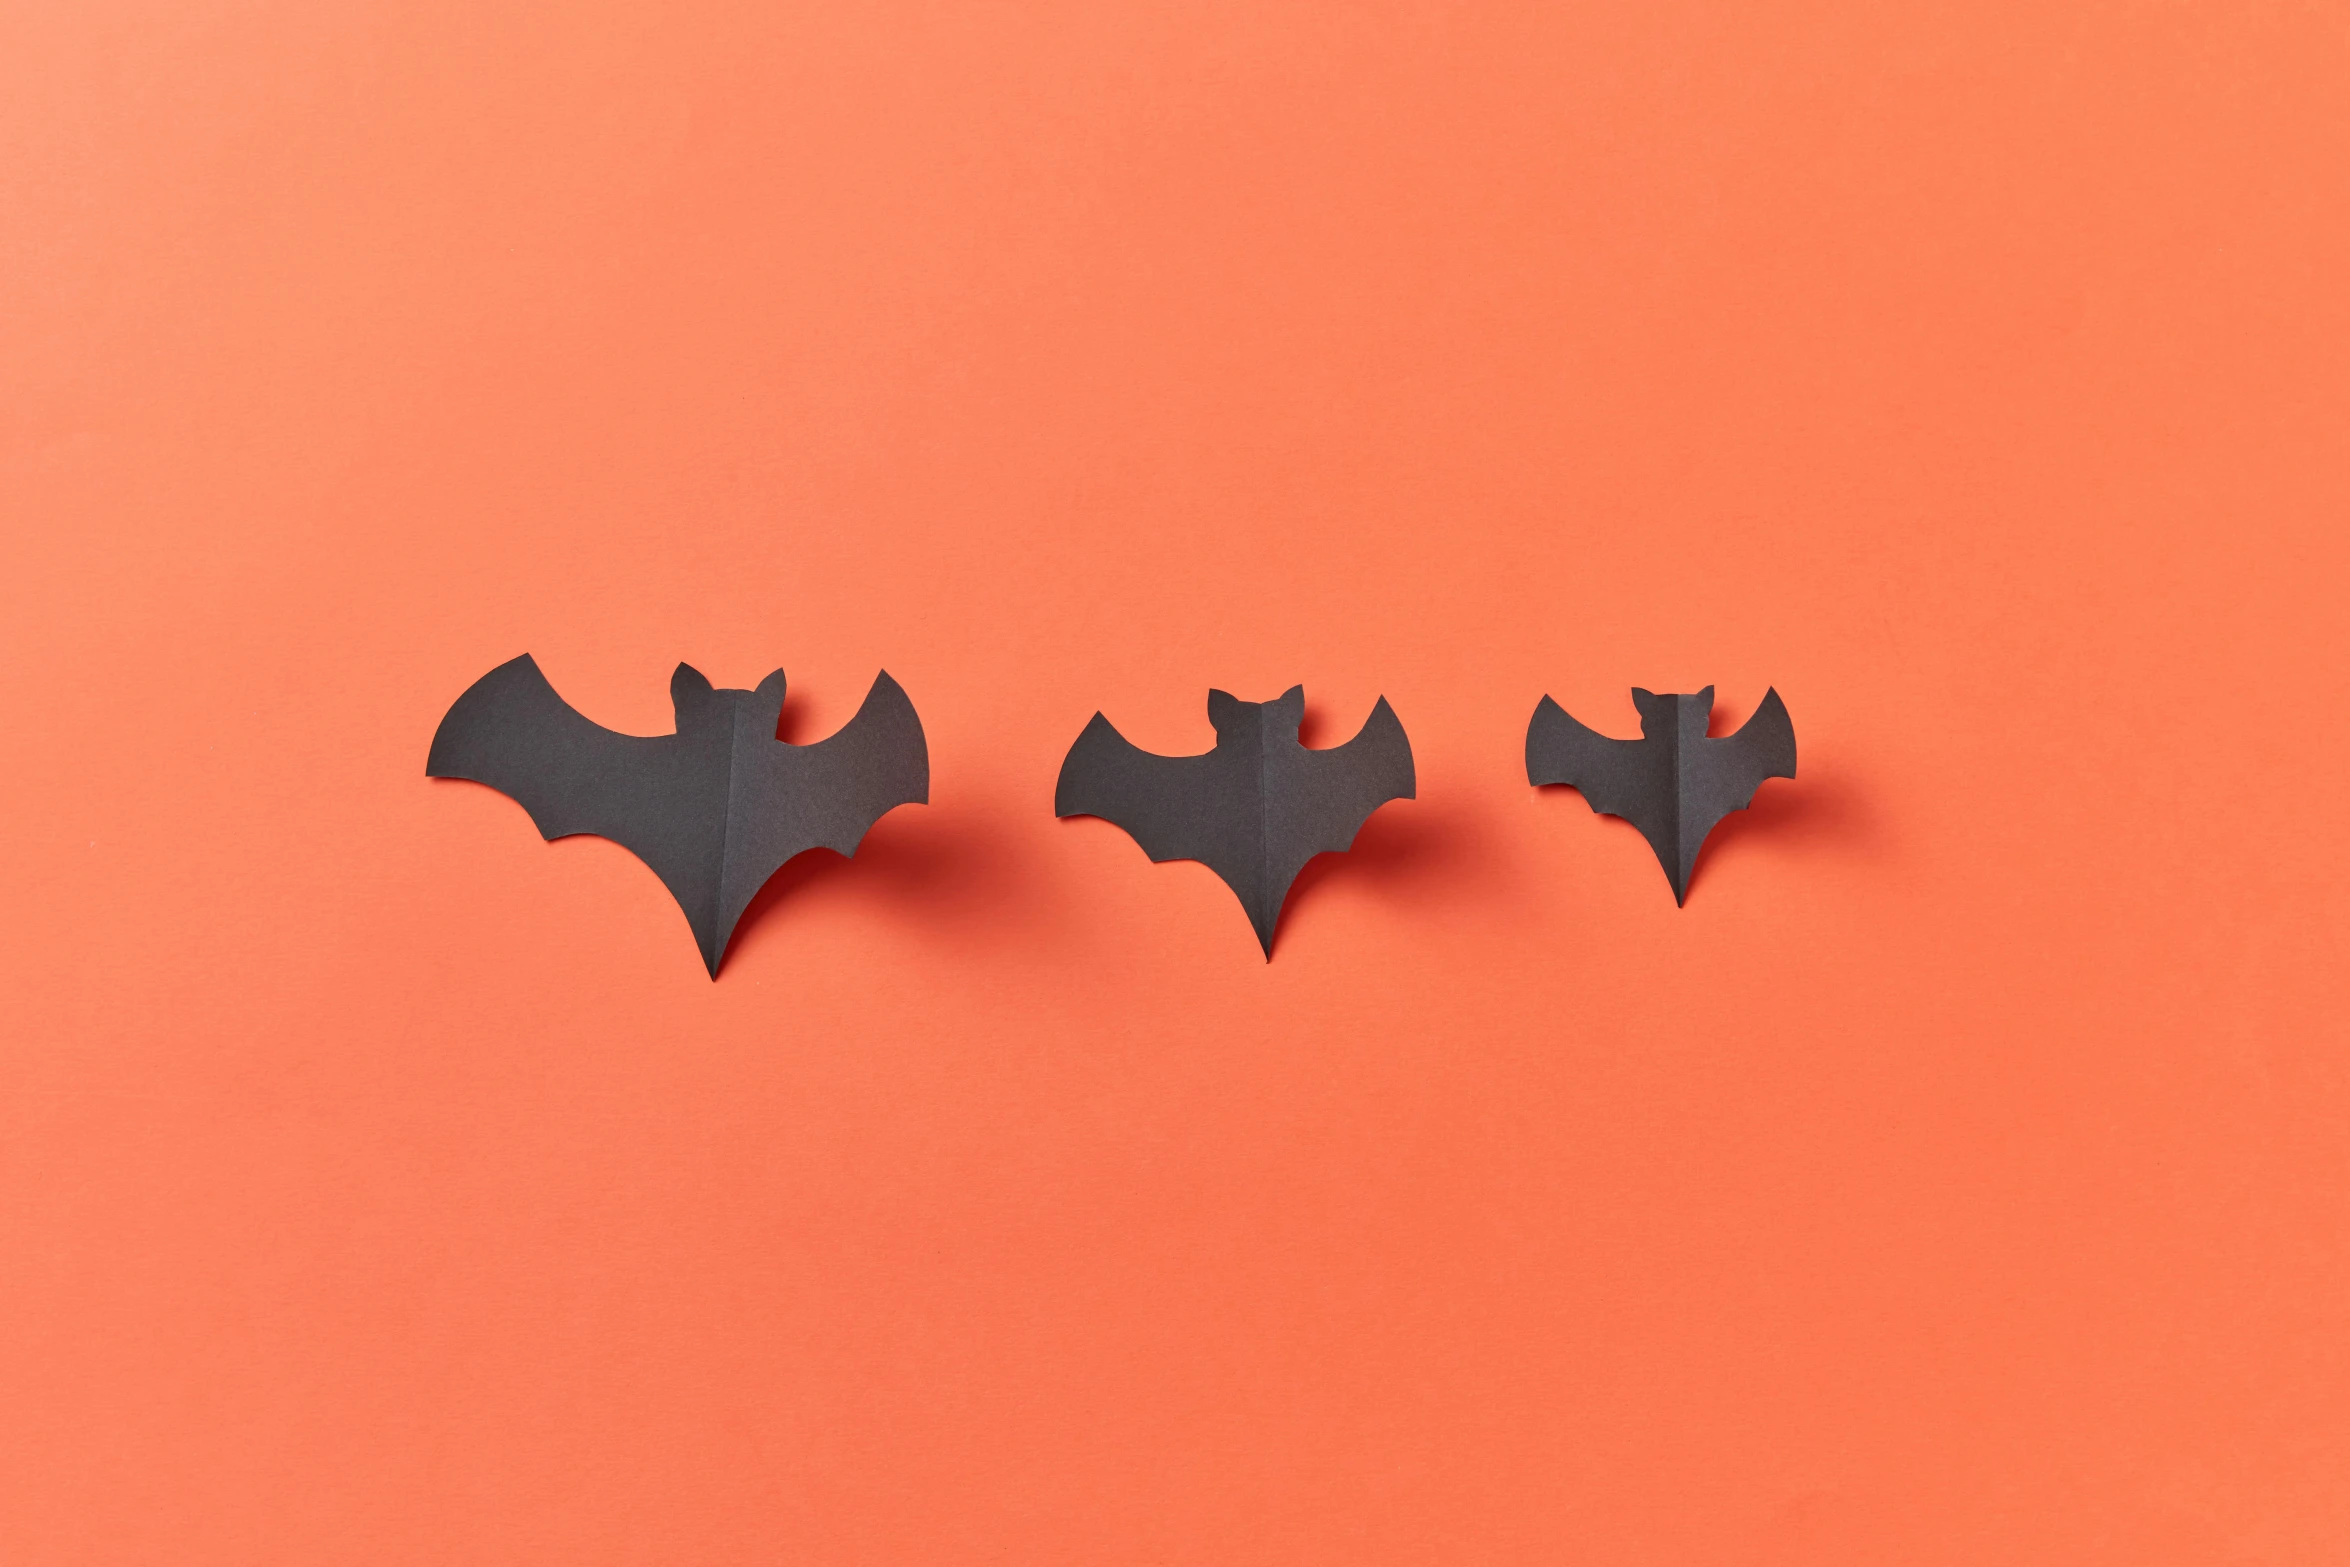 three bats sitting next to each other on an orange surface